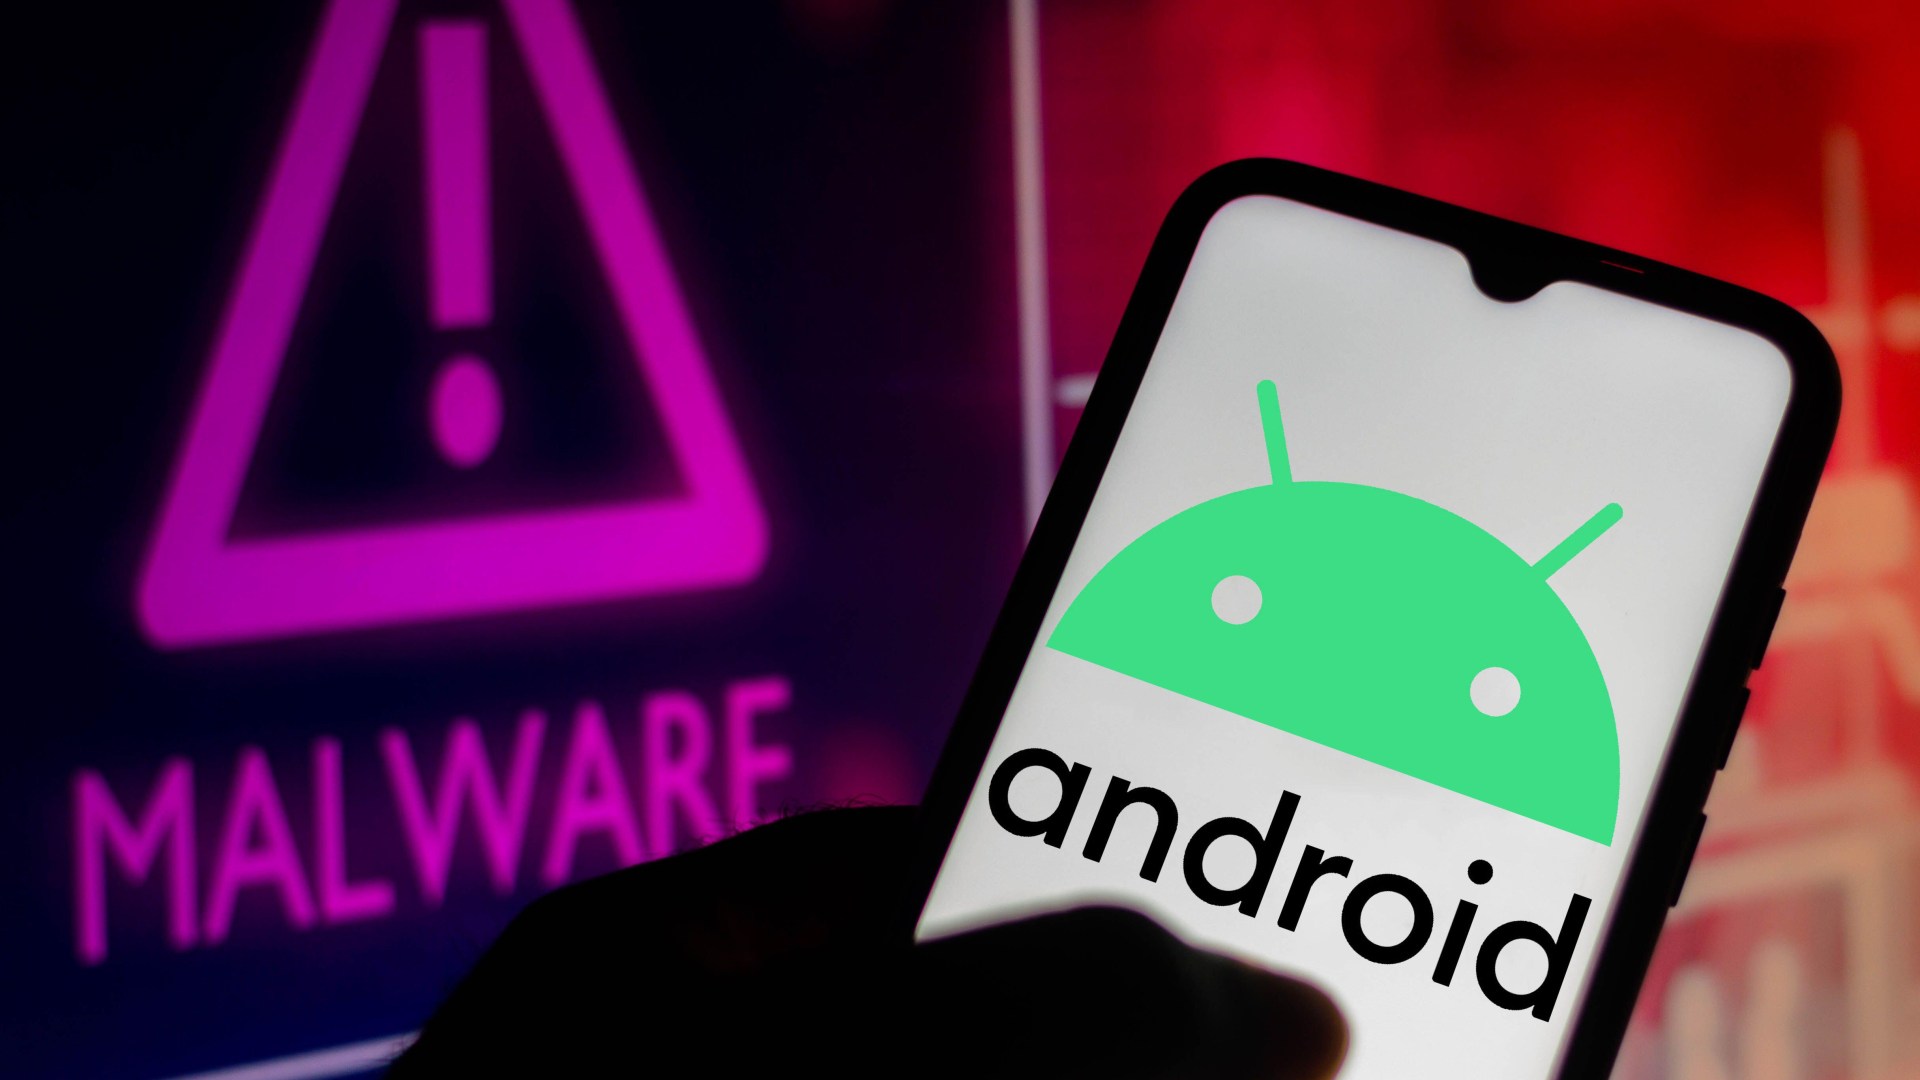 Chilling Attack Warning: Android Users Beware of Screen Snooping Hack that Can Empty Your Accounts